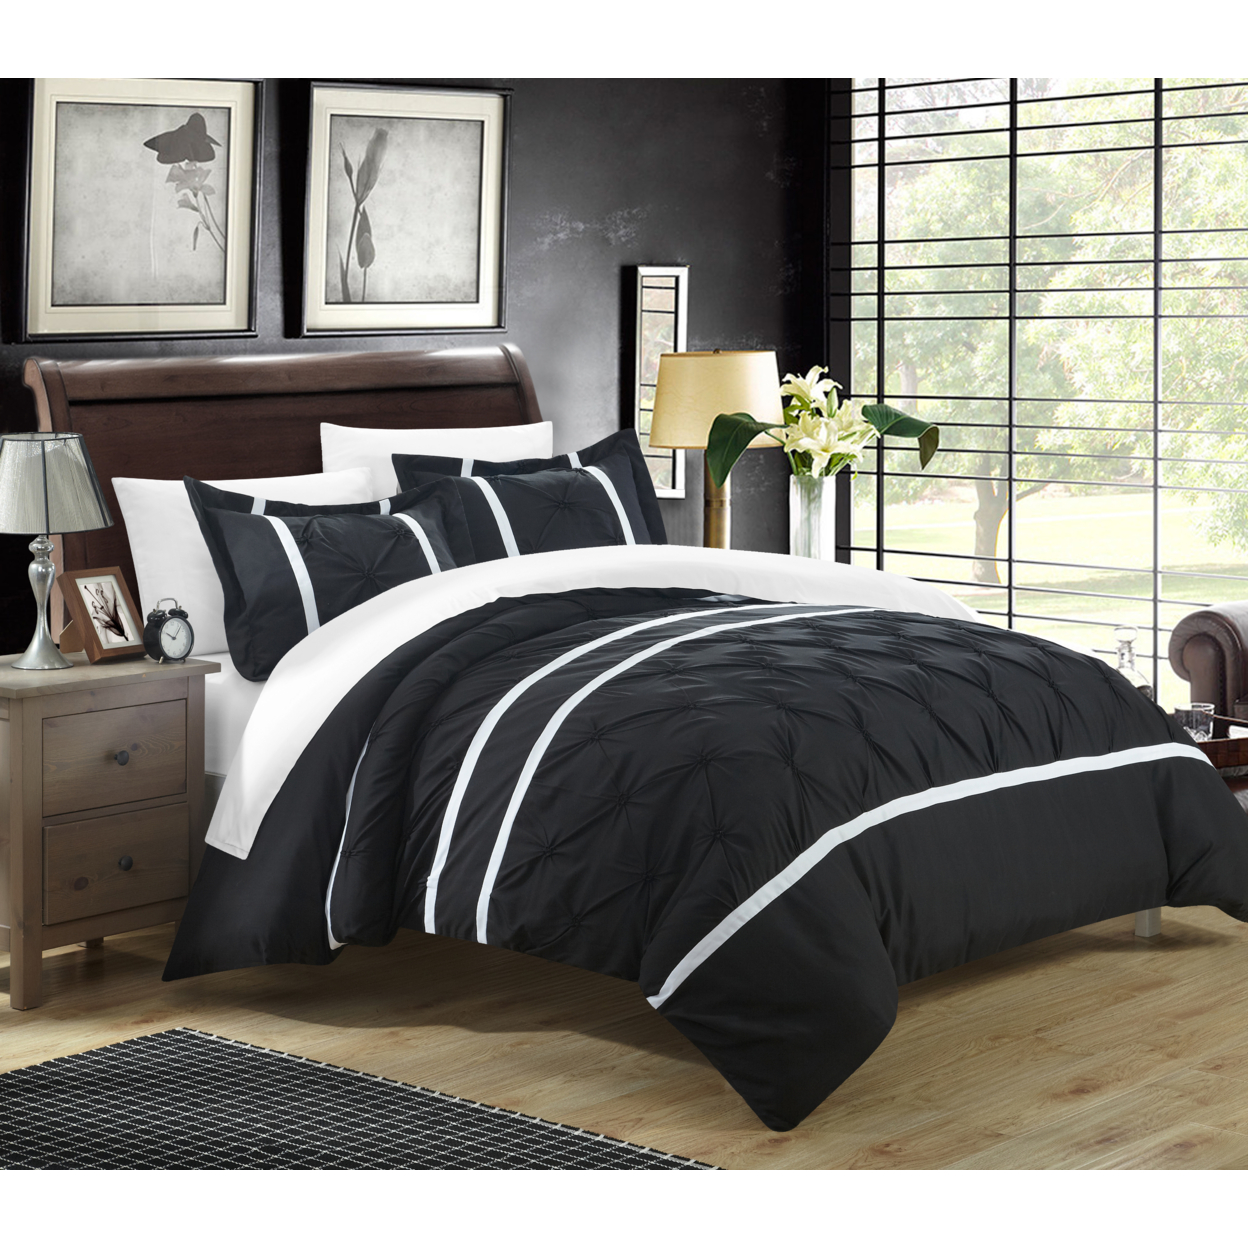 Chic Home 3 Piece Nica Pinch Pleat Pintuck Duvet Cover And Shams Set - Black, Queen